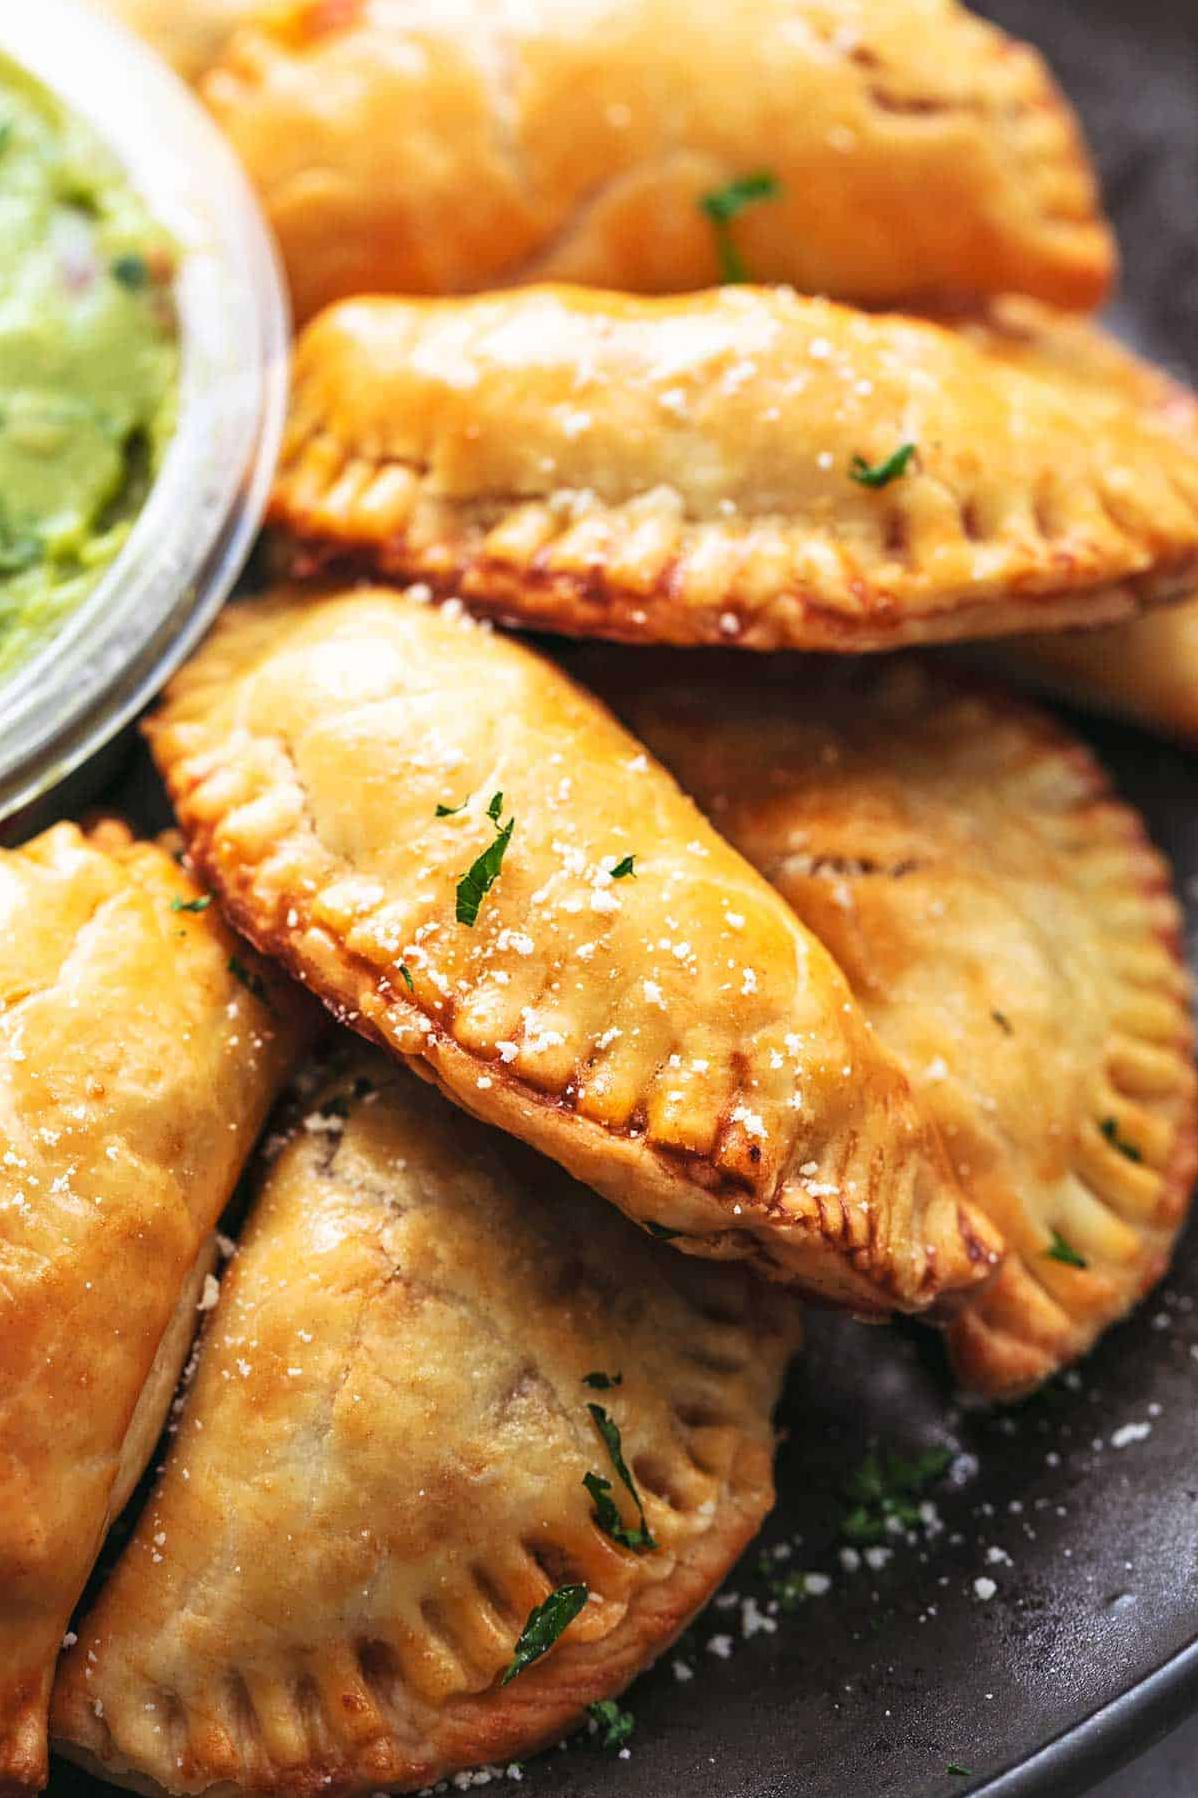  Experience a burst of flavor with every bite of these savory meat empanadas.